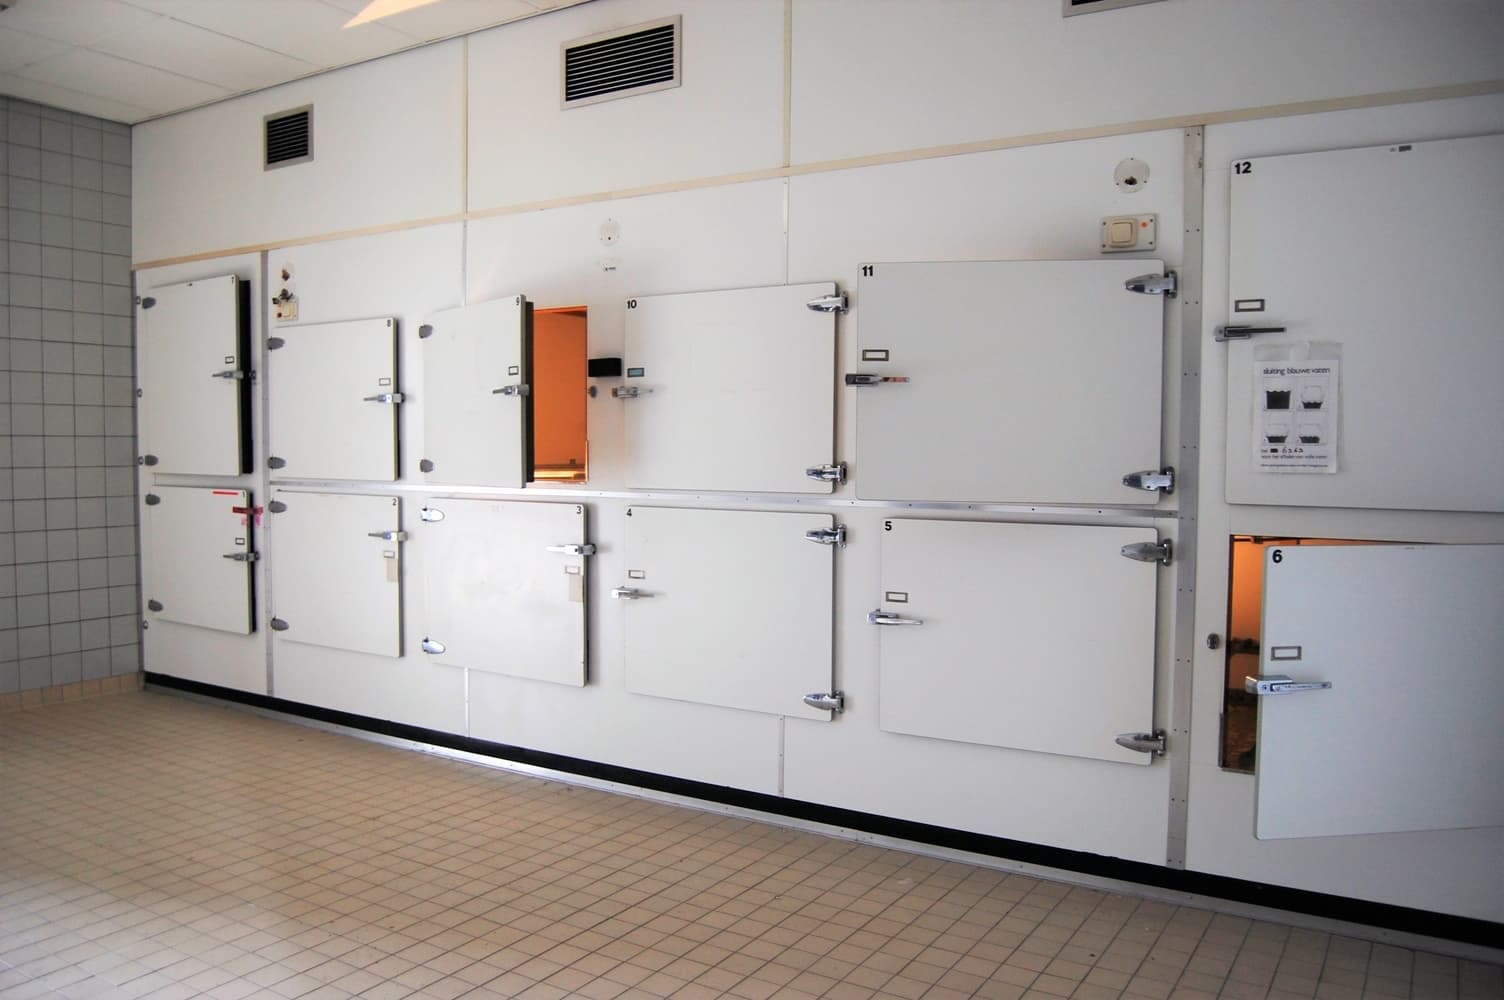 Guardian Morgue Overflow Cold Storage Container System Rentals